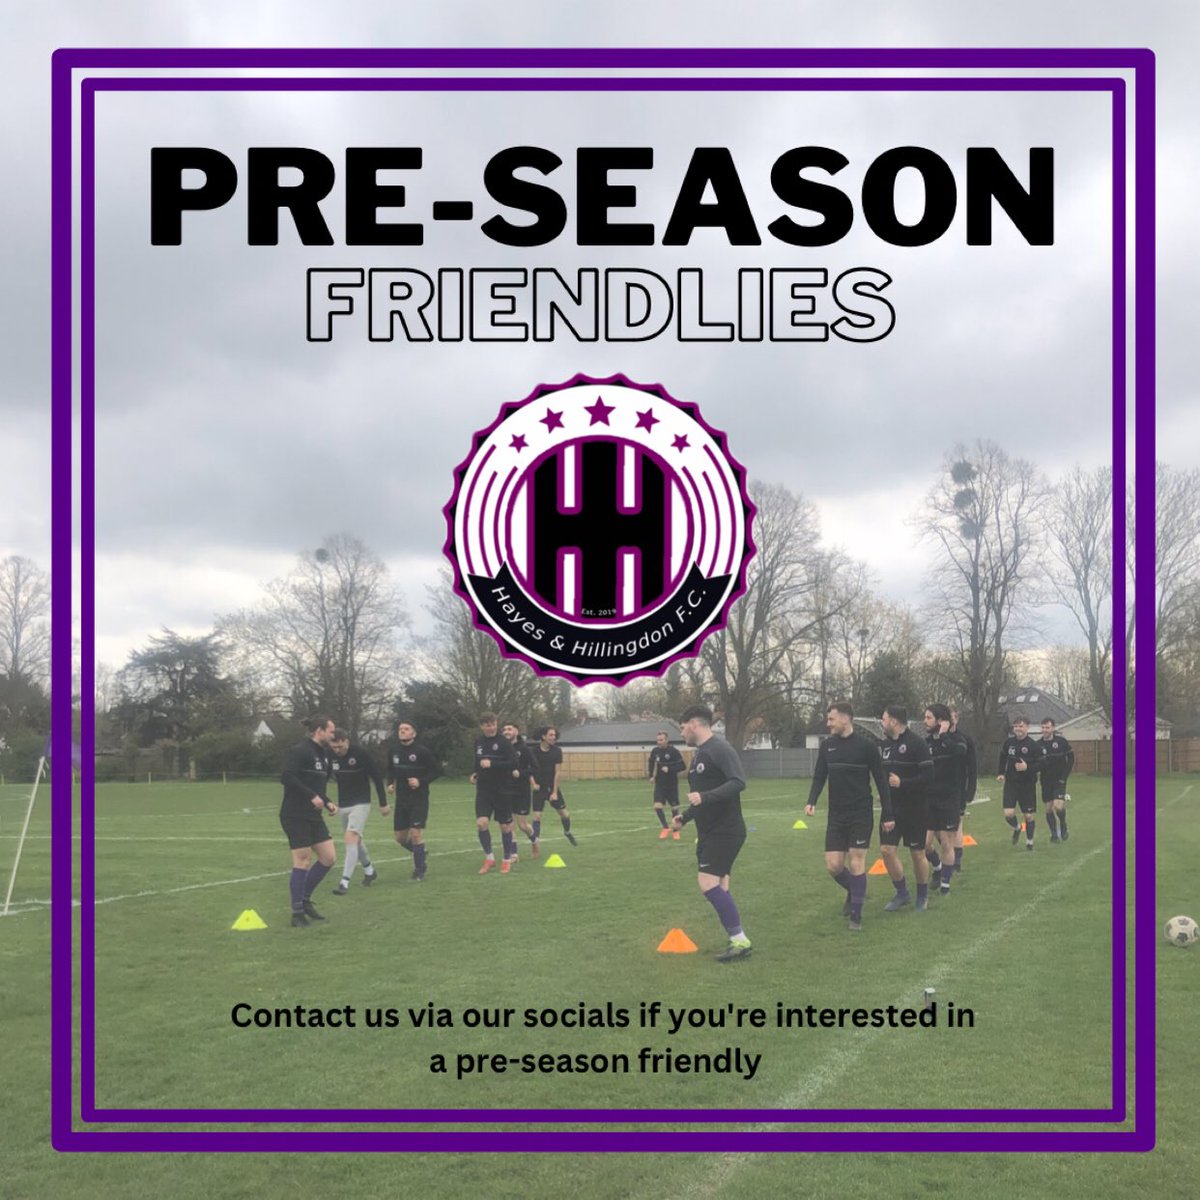 Contact us if you’re interested in sponsoring our club, attending our open trial session or looking for pre season friendlies 👌🏻👊🏼

@swirlesbarbers @Southbournees @RichingsSports 

#HHFC #morethanafootballclub #hayesandhillingdonfc #hhfc 

💜🖤